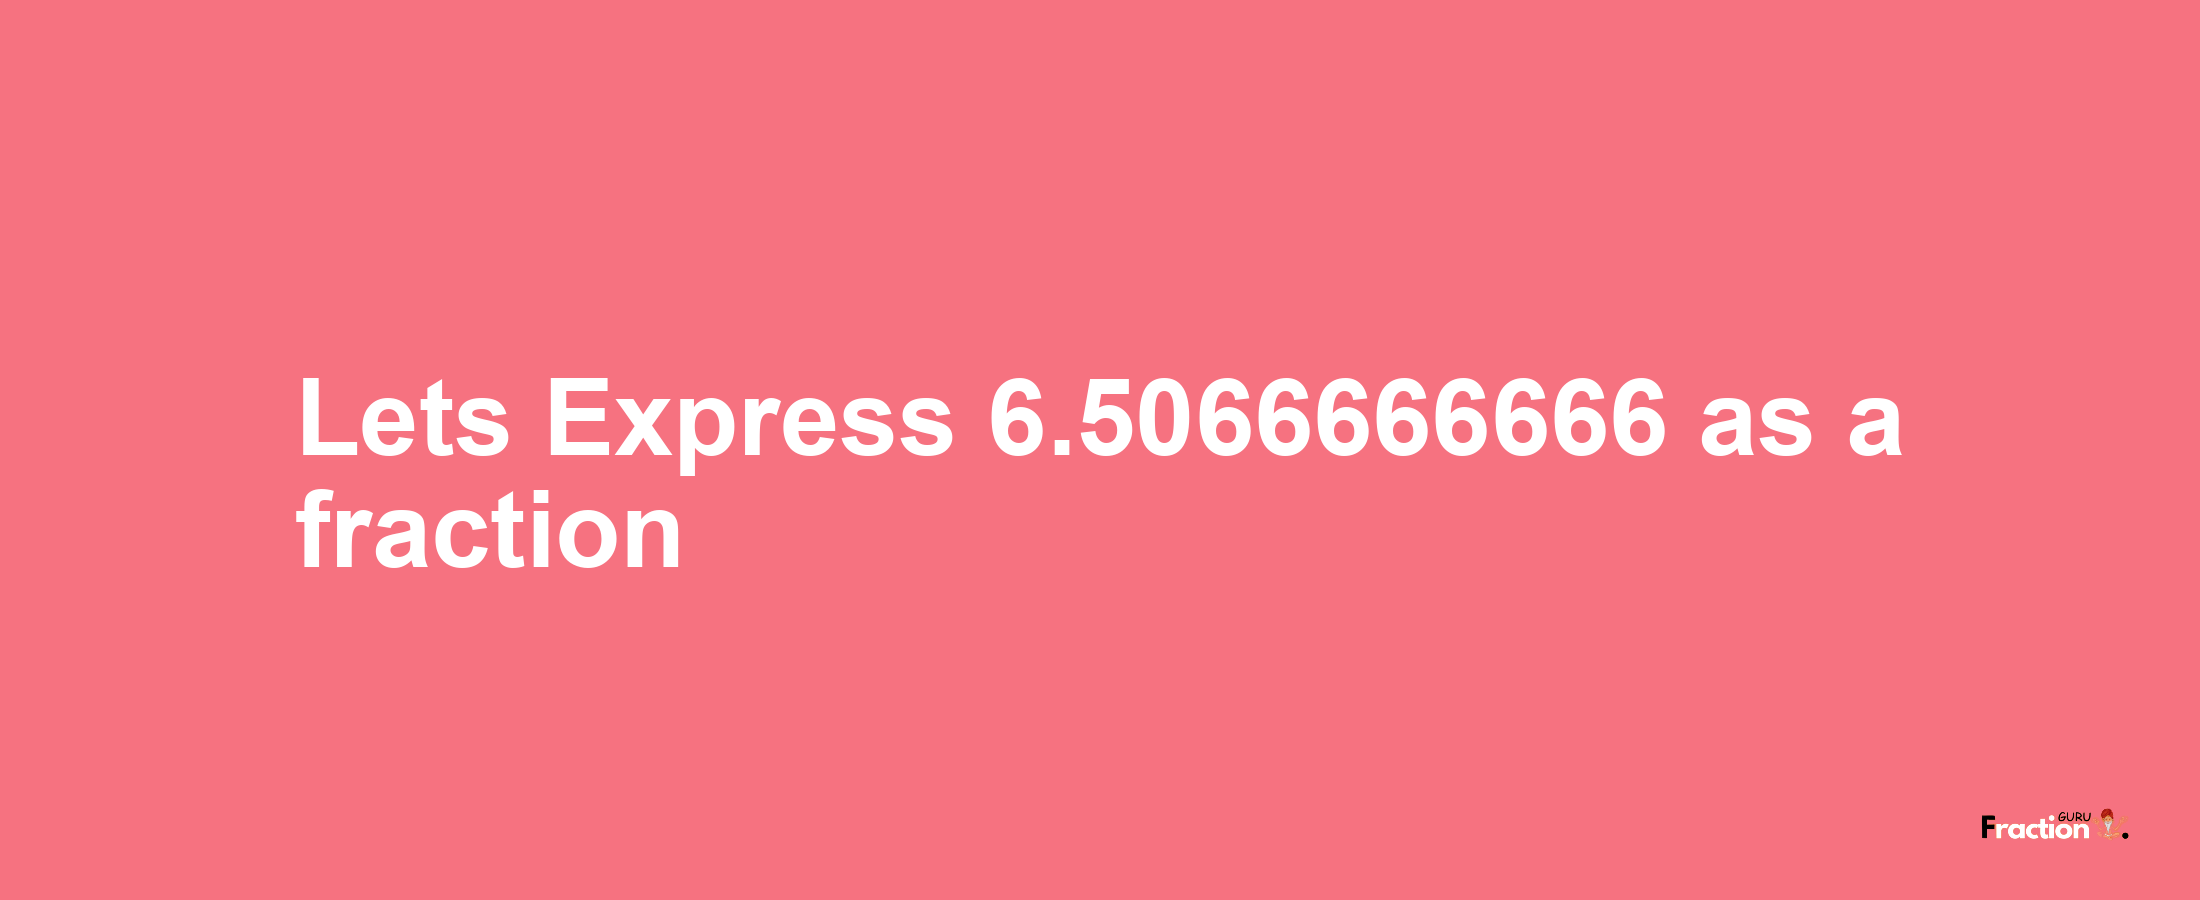 Lets Express 6.5066666666 as afraction